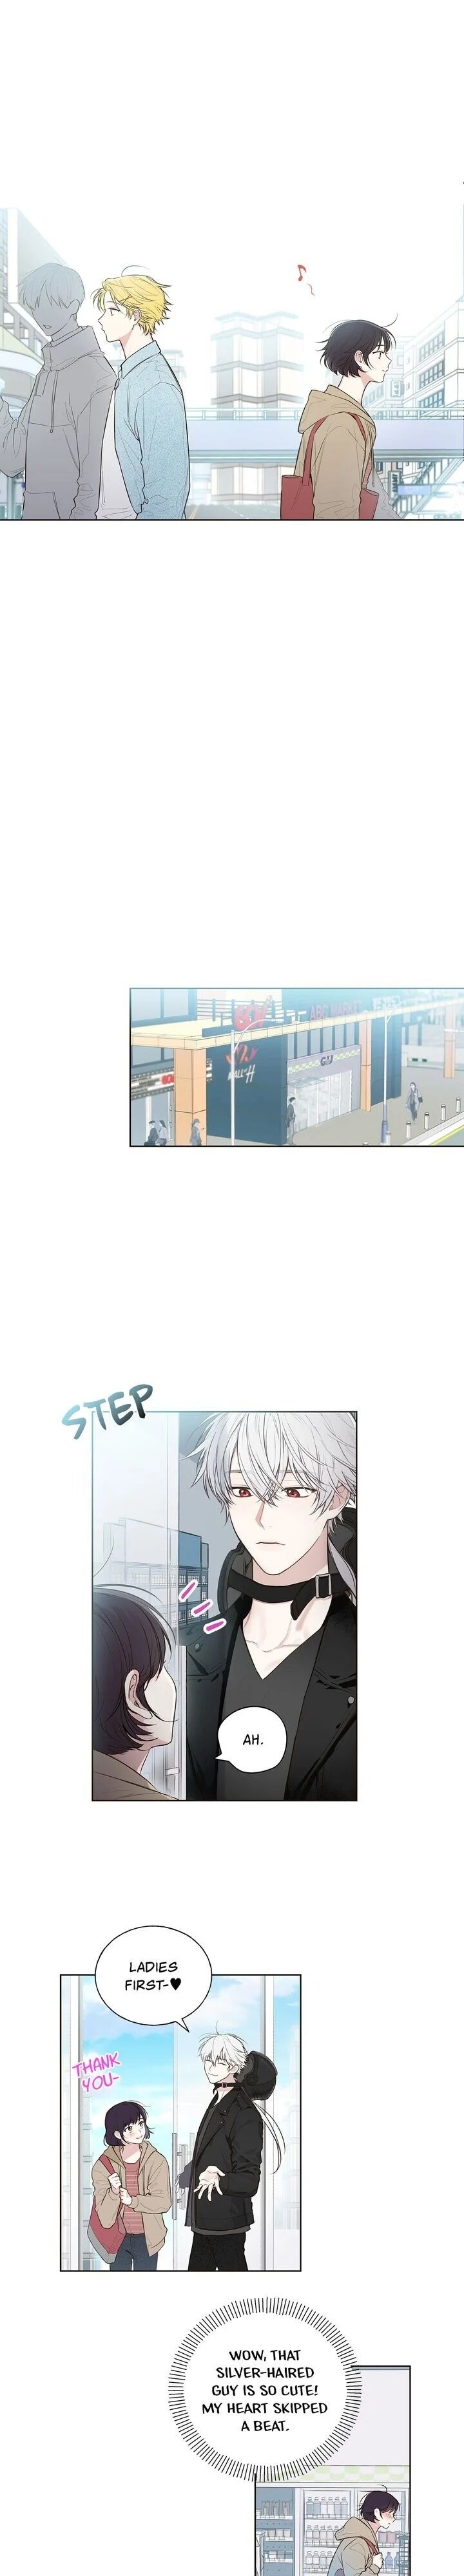 Invitation Of The Mystic Messenger - Page 3